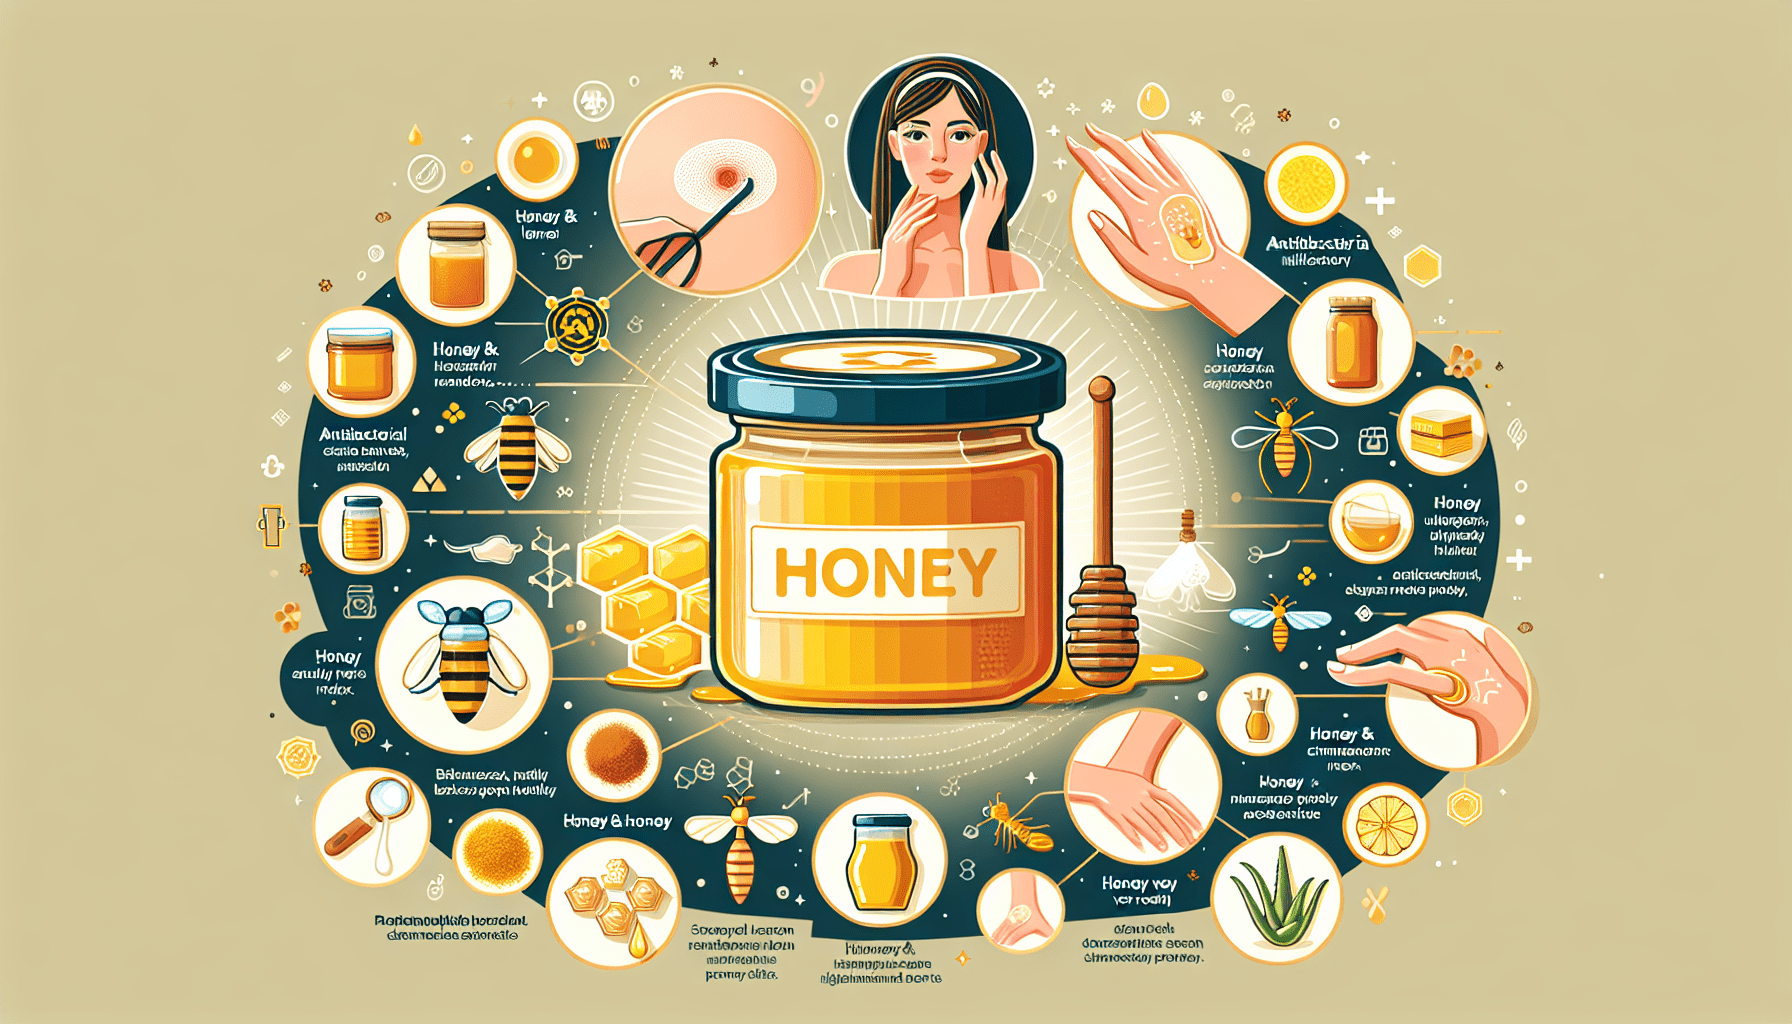 2 how does honey contribute to wound healing and skin health 1